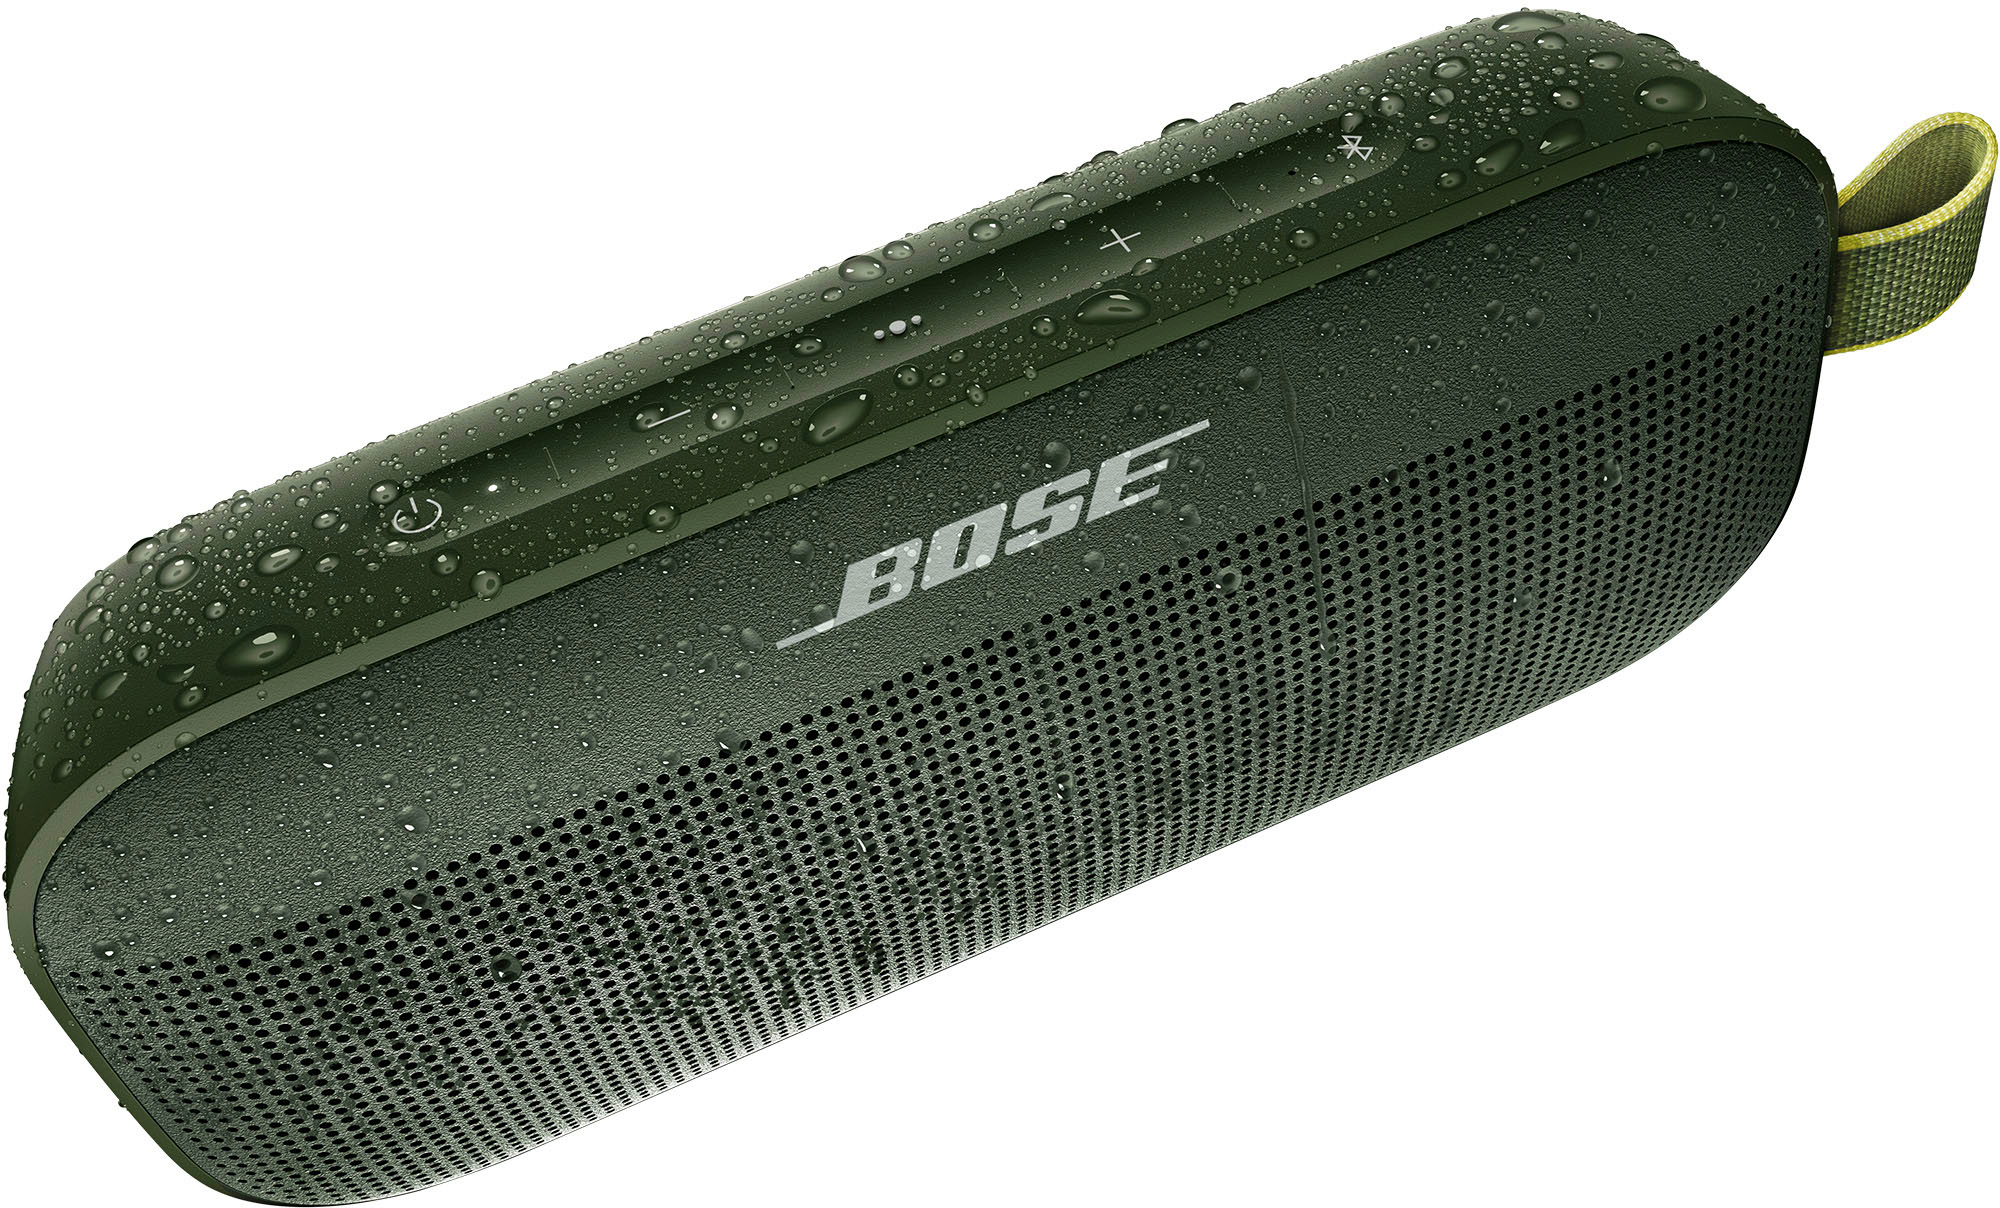 Angle View: Bose - SoundLink Flex Portable Bluetooth Speaker with Waterproof/Dustproof Design - Limited Edition Cypress Green